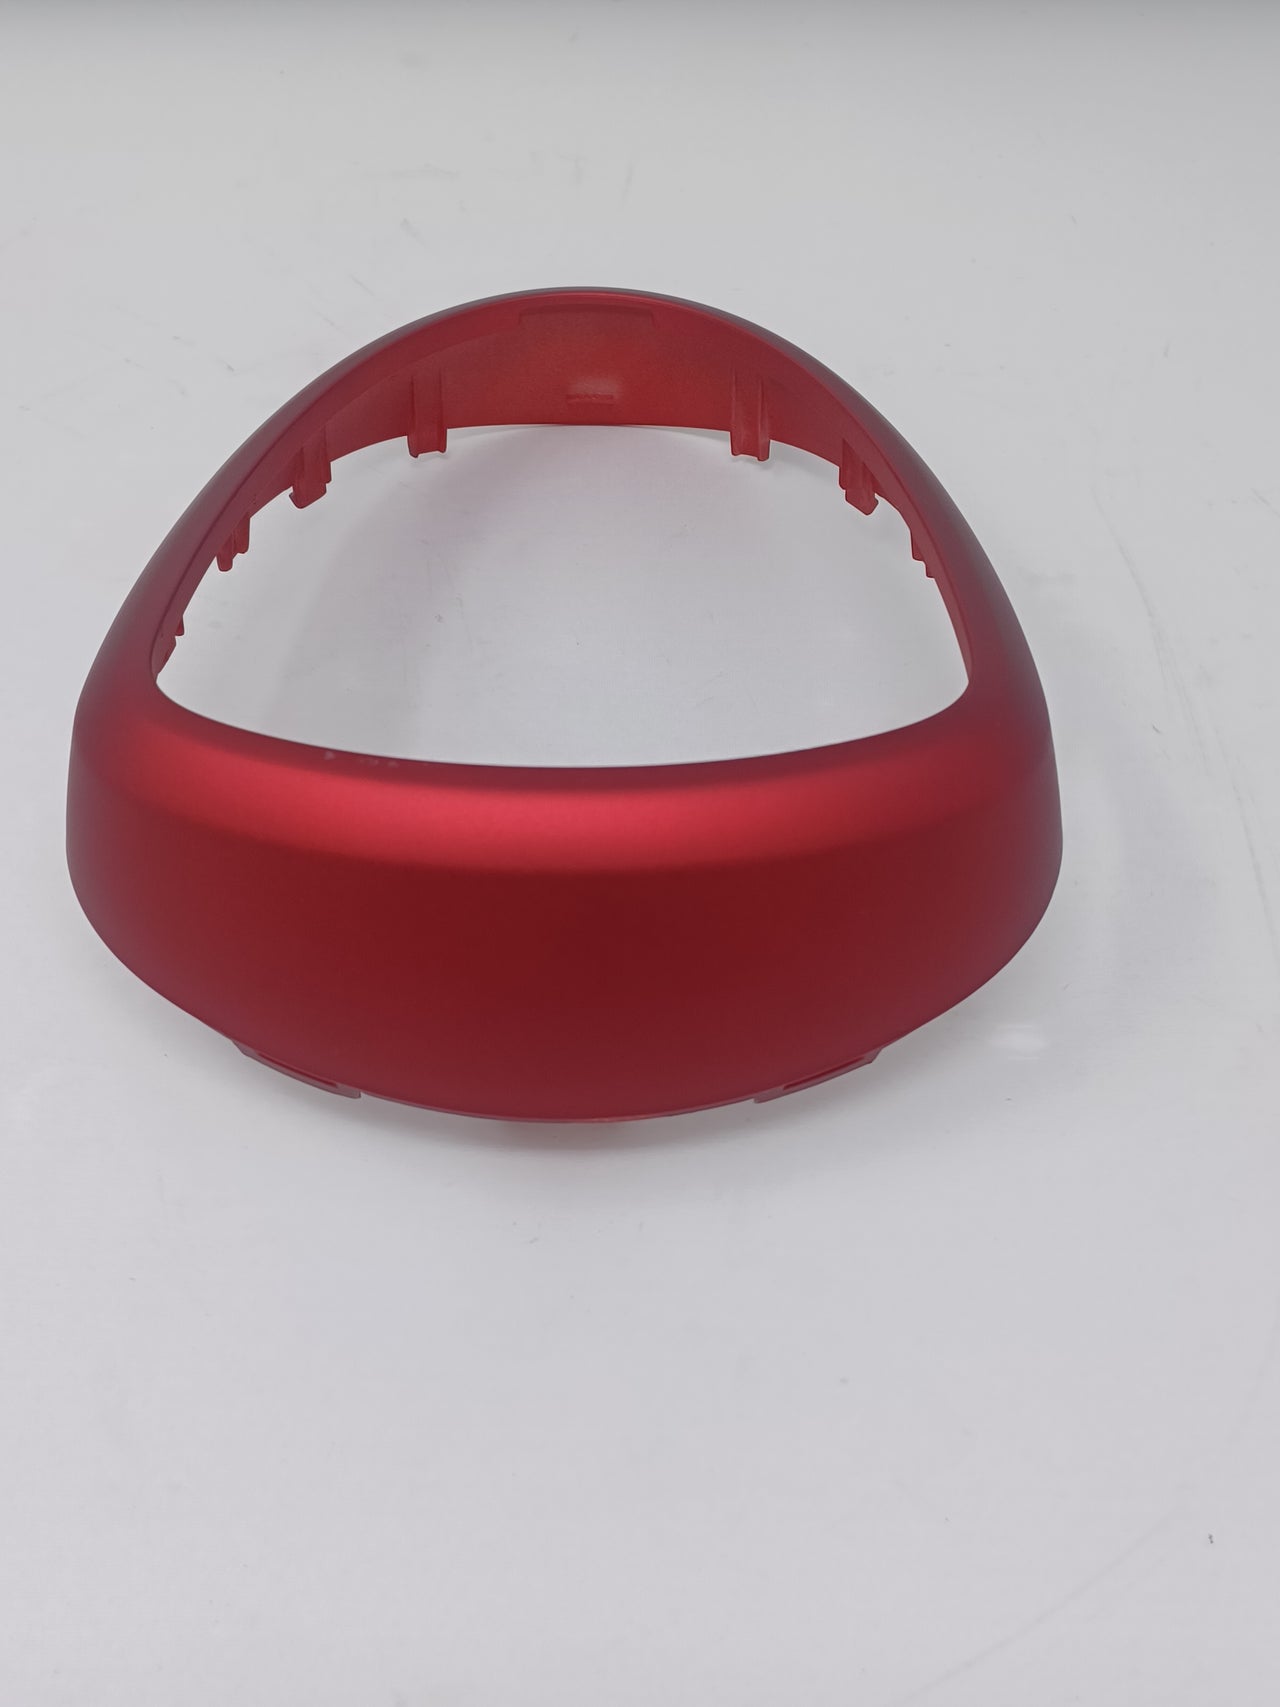 50cc Roma Scooter	Speedometer Upper Cover -- Red	53207-S9E1-0000